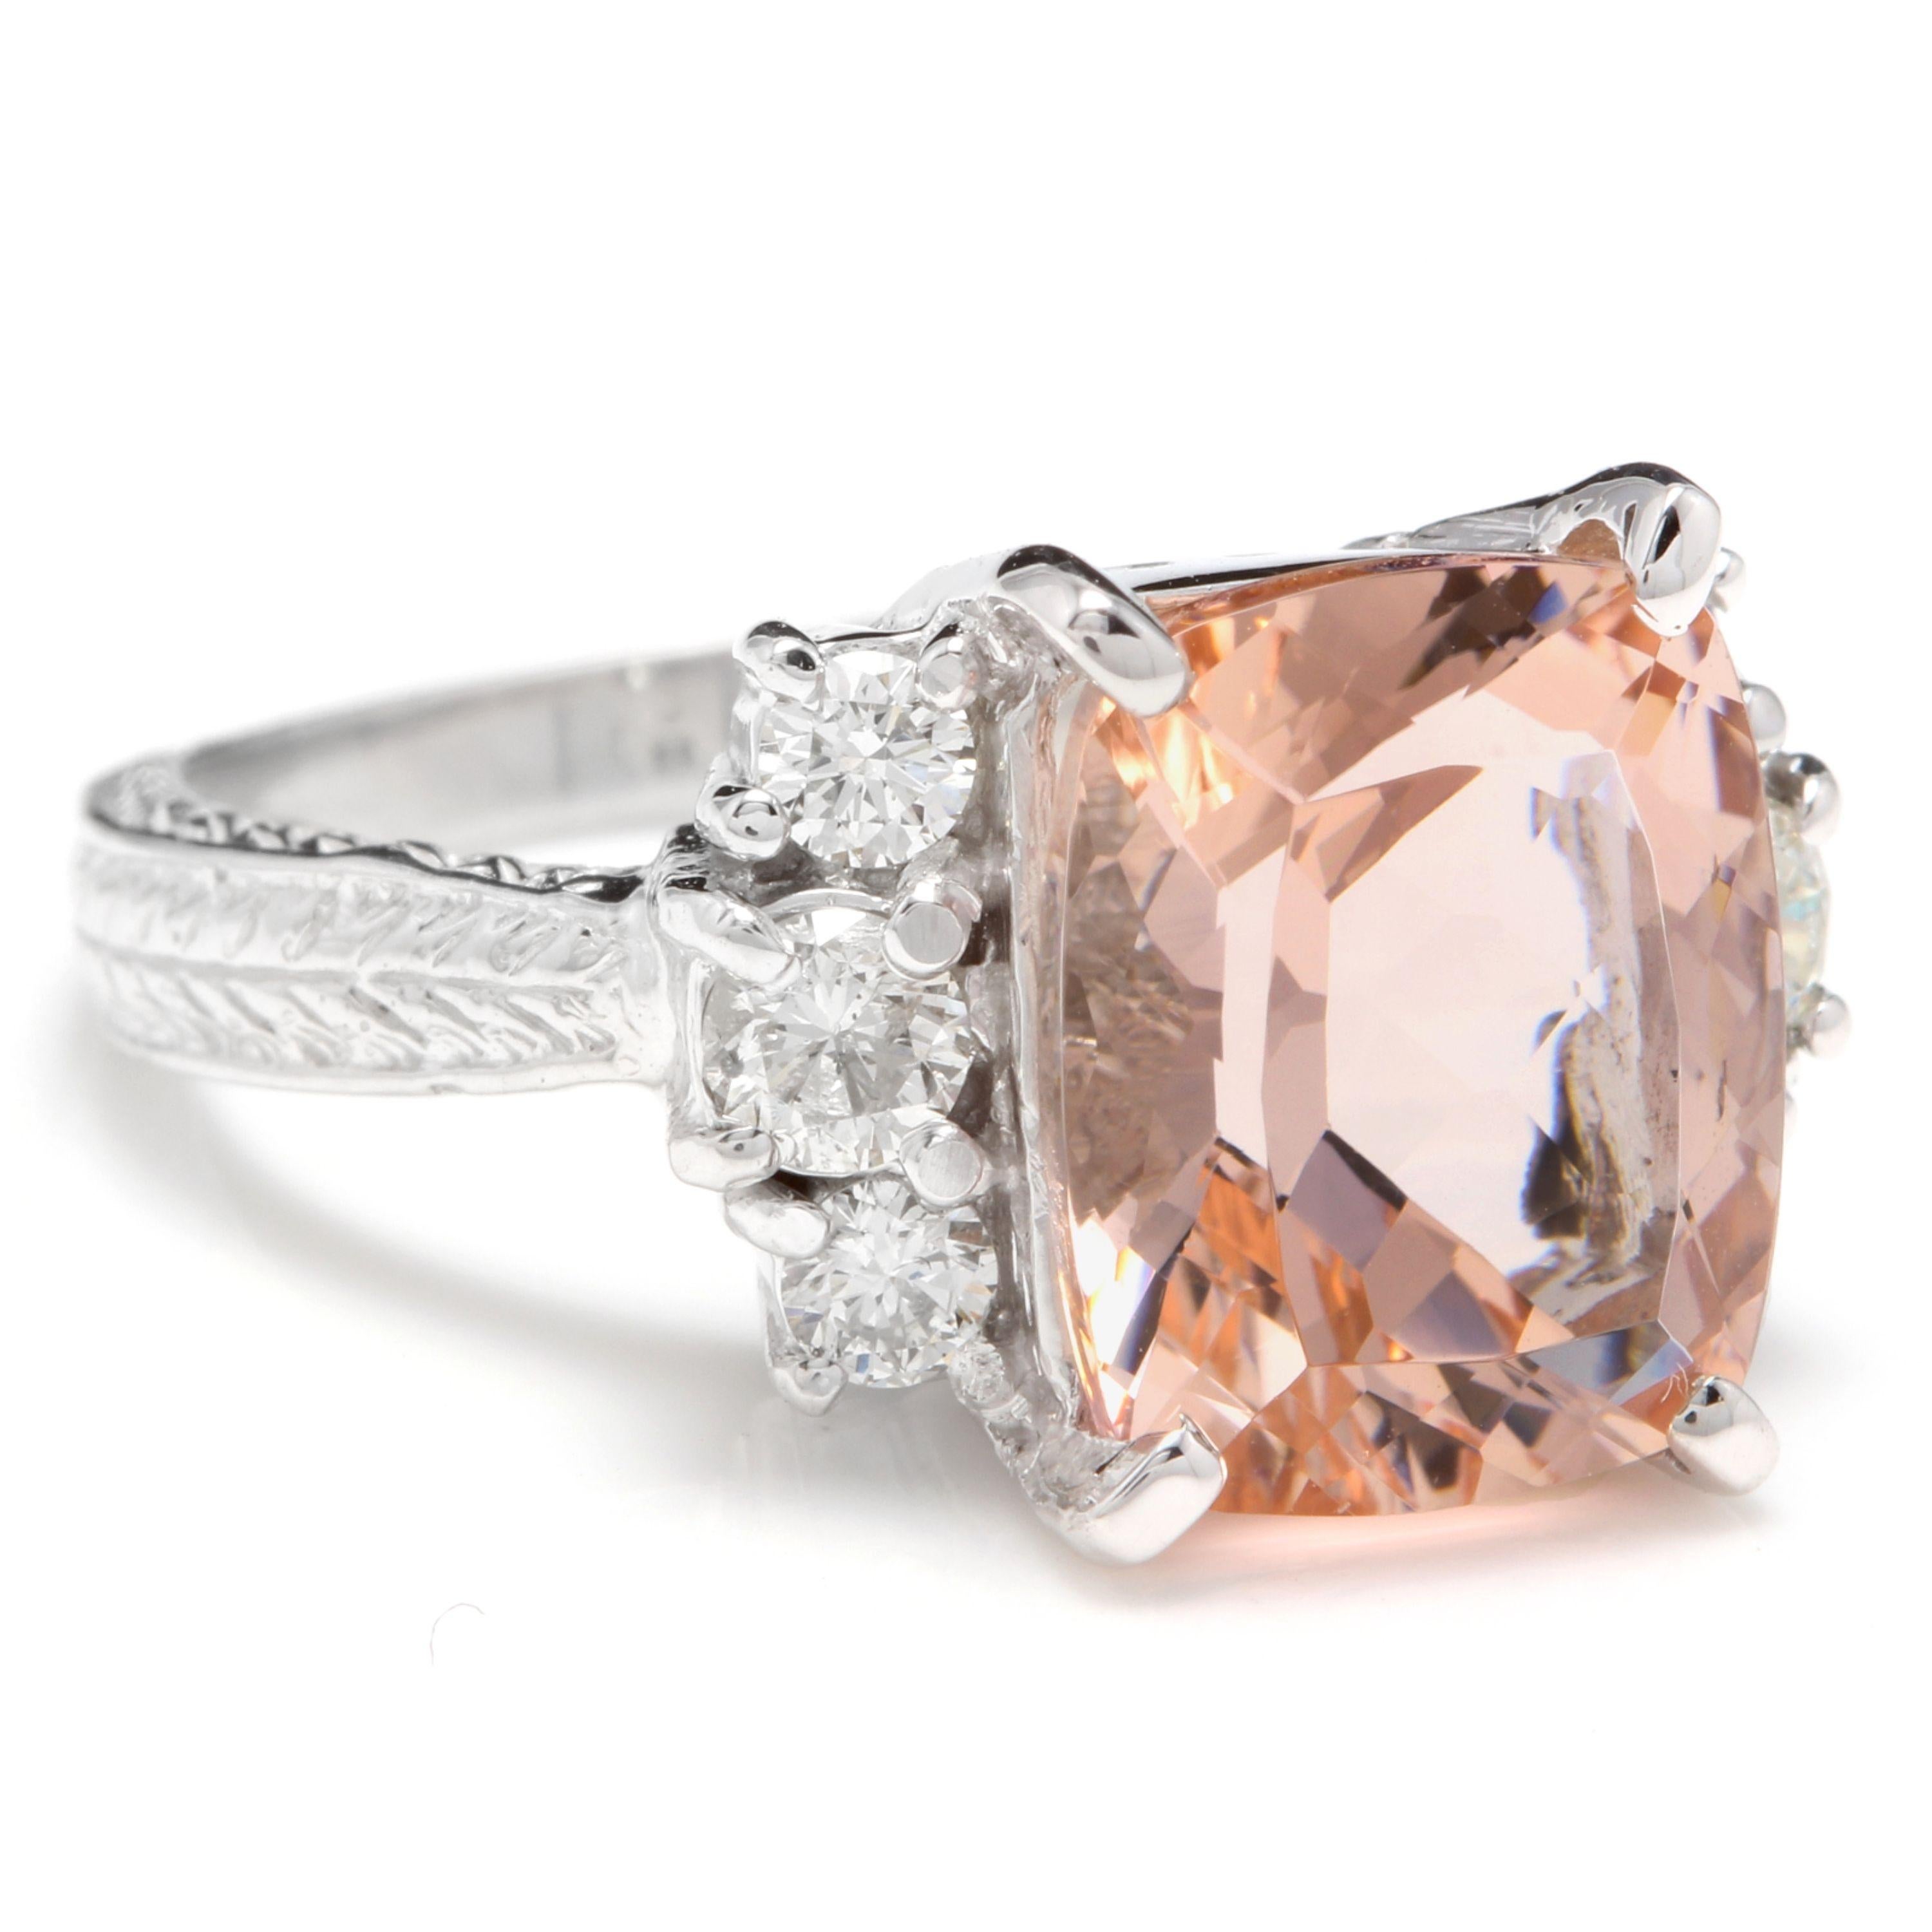 6.20 Carats Exquisite Natural Morganite and Diamond 14K Solid White Gold Ring

Total Natural Cushion Morganite Weights: Approx. 5.50 Carats

Morganite Measures: Approx. 11.00 x 9.00mm

Natural Round Diamonds Weight: Approx. 0.70 Carats (color G-H /